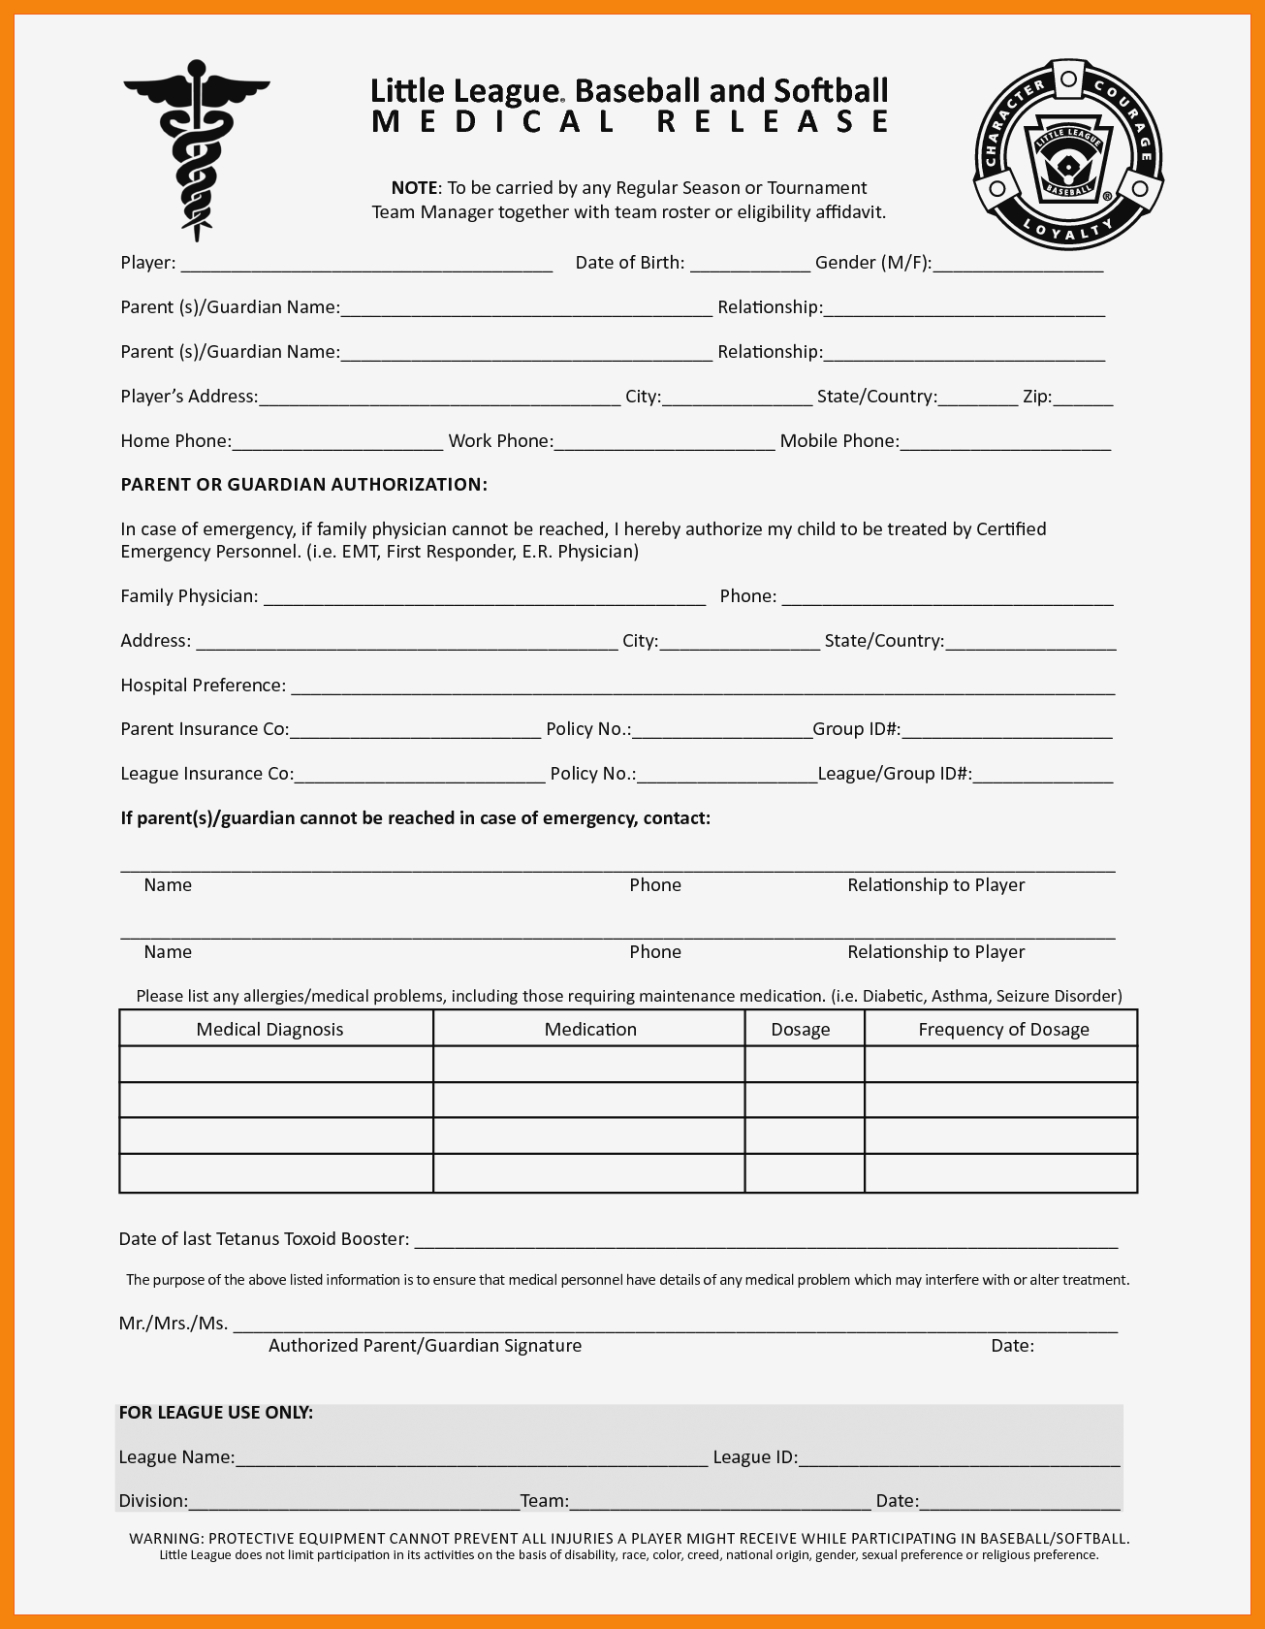 printable-medical-forms-printable-forms-free-online